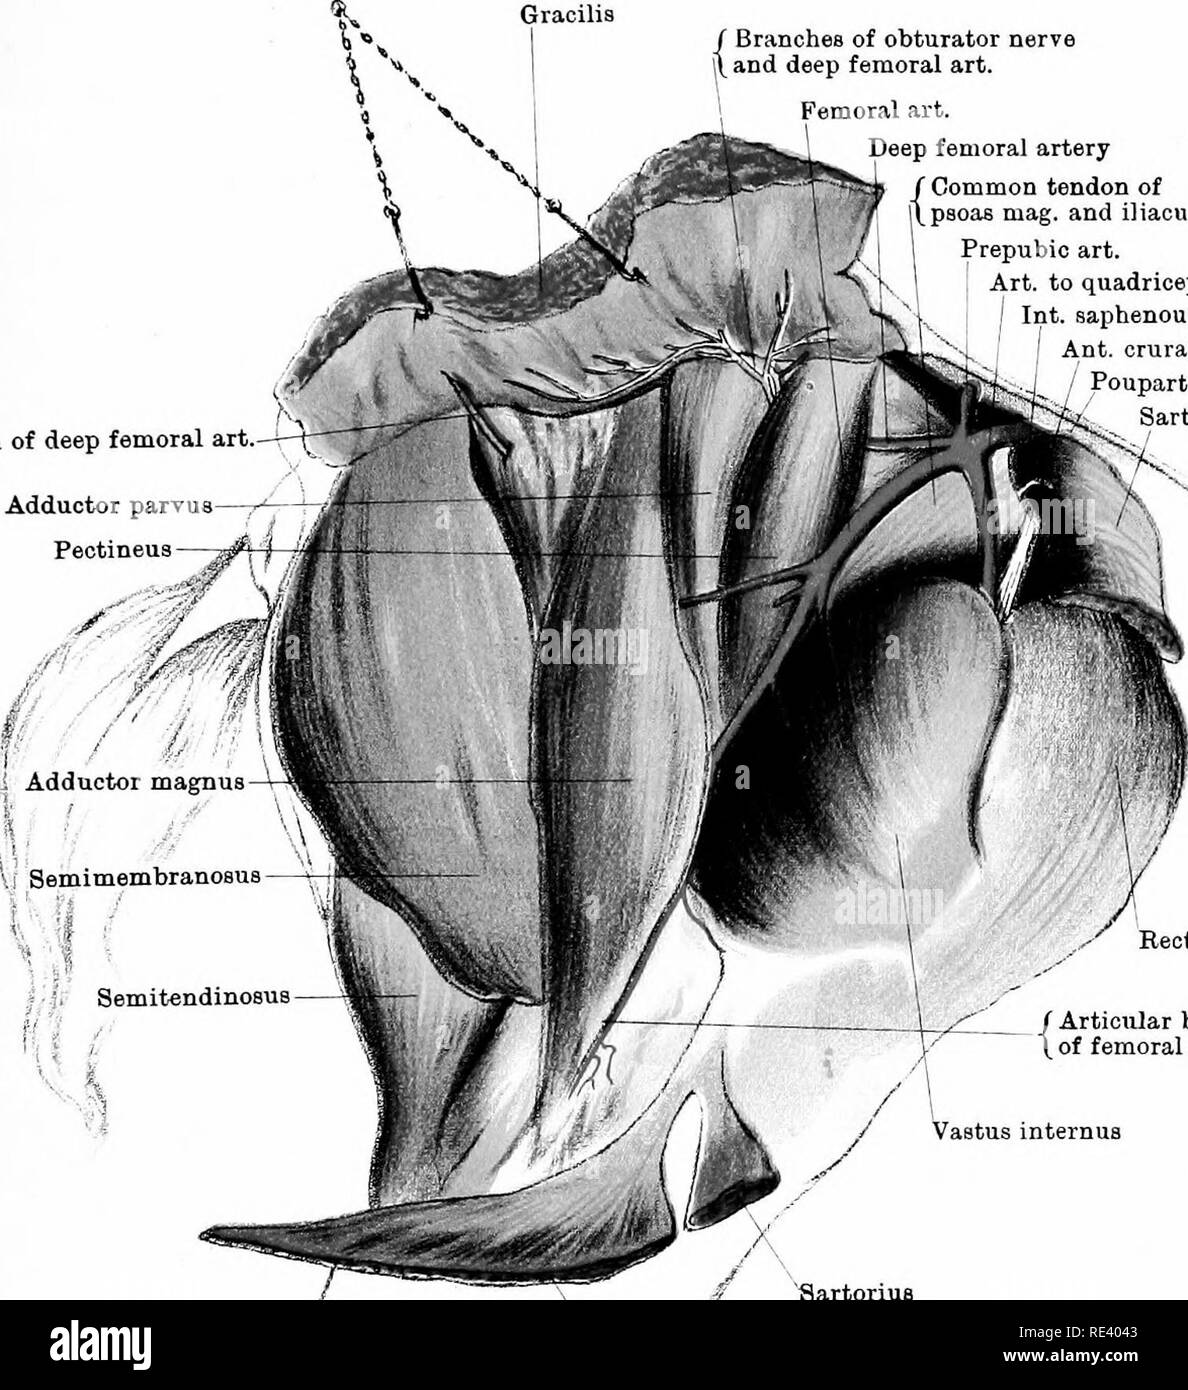 . The anatomy of the horse, a dissection guide. Horses. PLATE XIII J Branchea of obturator nerve rt and deep femoral art. Branch of deep femoral art. Adductor parvus— Pectineus Deep femoral artery / Common tendon of i psoas mag. and iliacus Prepubic art. Art. to quadriceps Int. saphenous nerve Ant. crural nerve [^ / Poupart's ligament Sartorius. Rectus femorie / Articular branch 1 of femoral art. Vastus internua / Gracilis IJra^AJAthograja^atj-W'AAiJolirisl'm.I^i^^.^Eandnir^LAXai. Please note that these images are extracted from scanned page images that may have been digitally enhanced for re Stock Photo